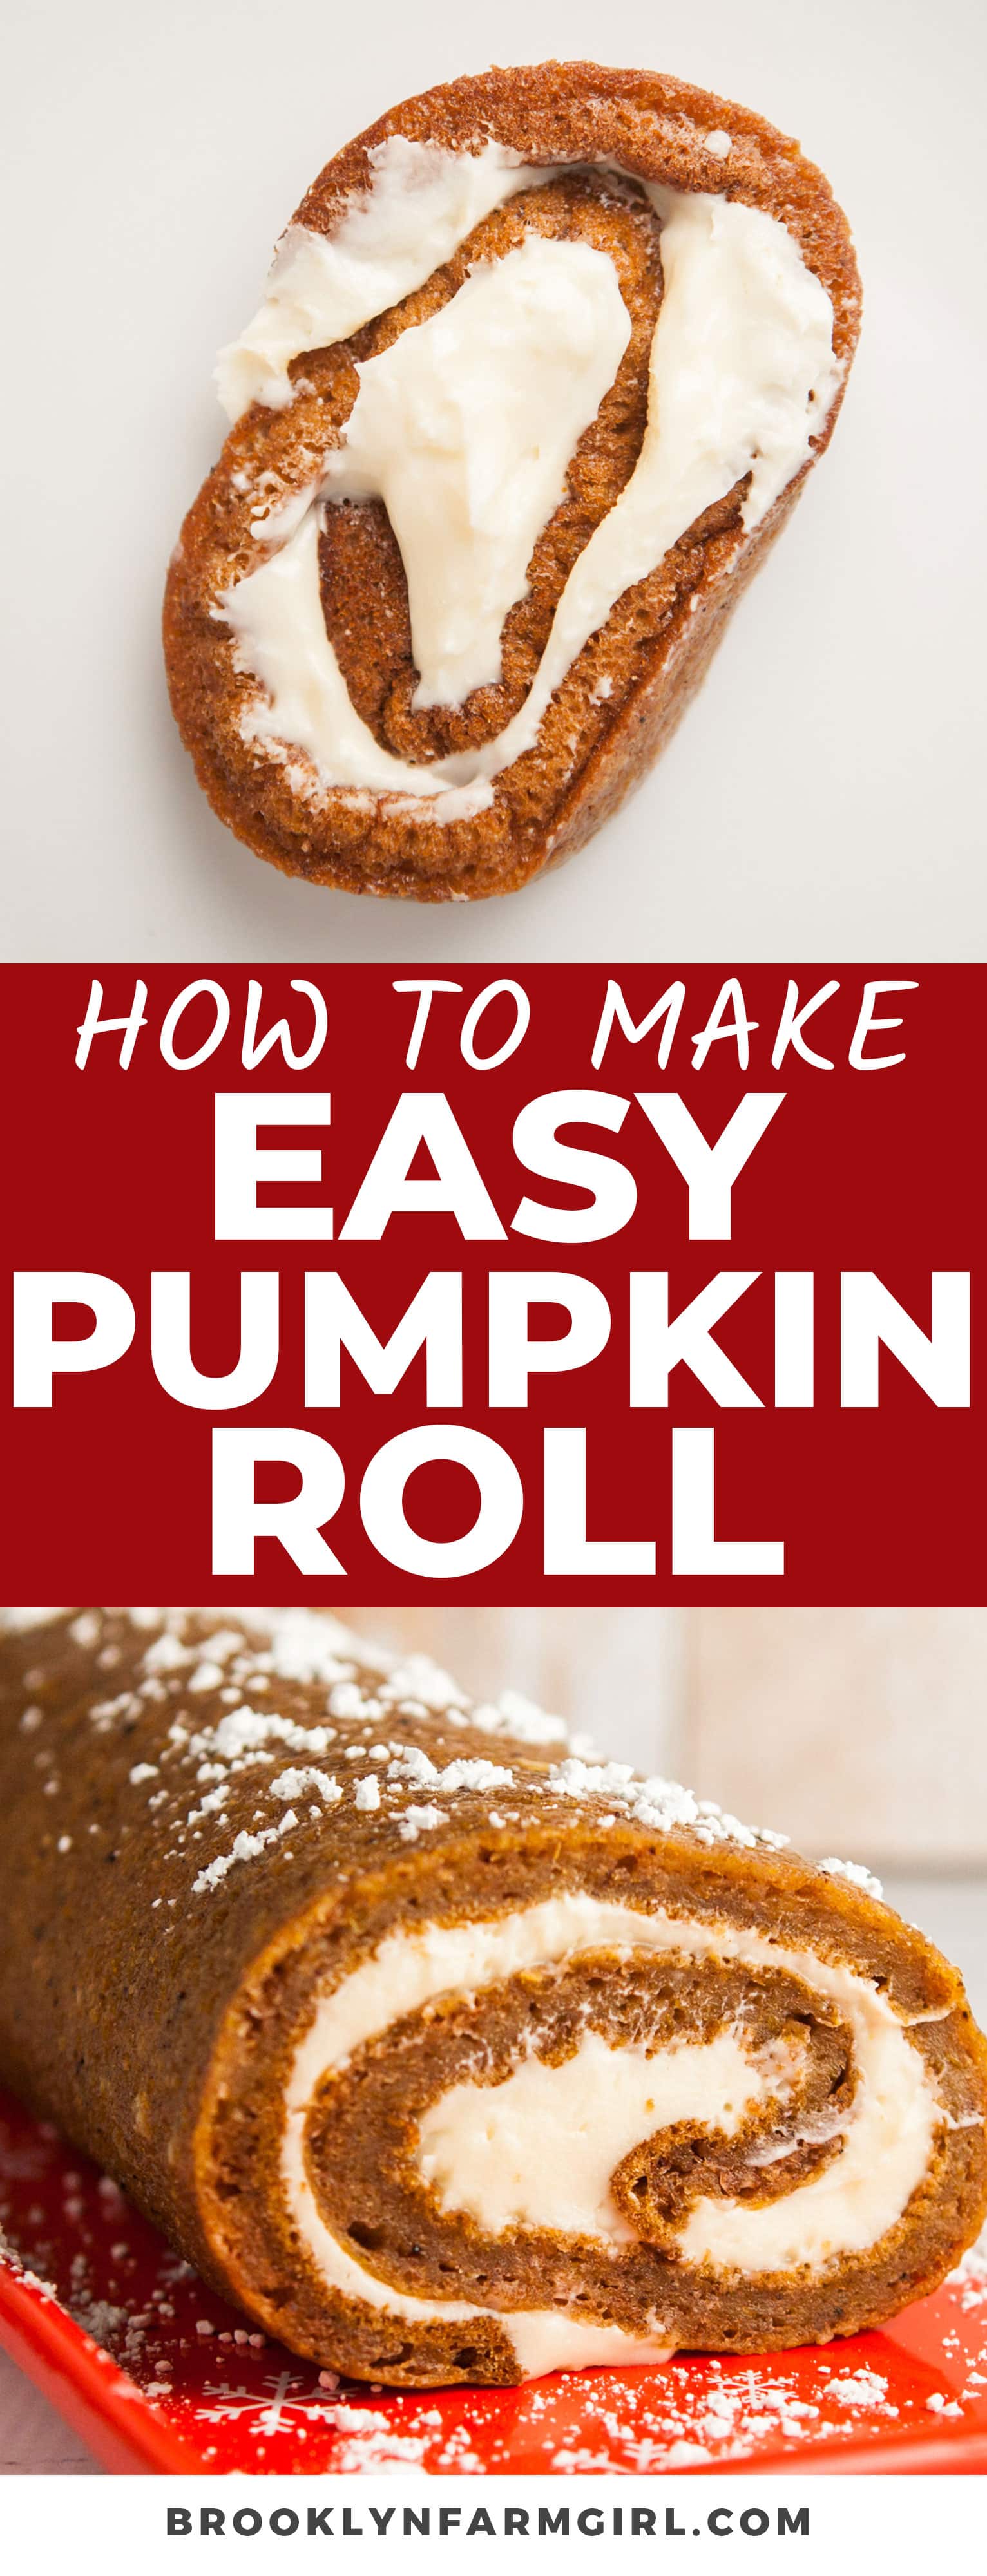 Pumpkin Roll With Cream Cheese Filling - Easy Recipe for First Timers!